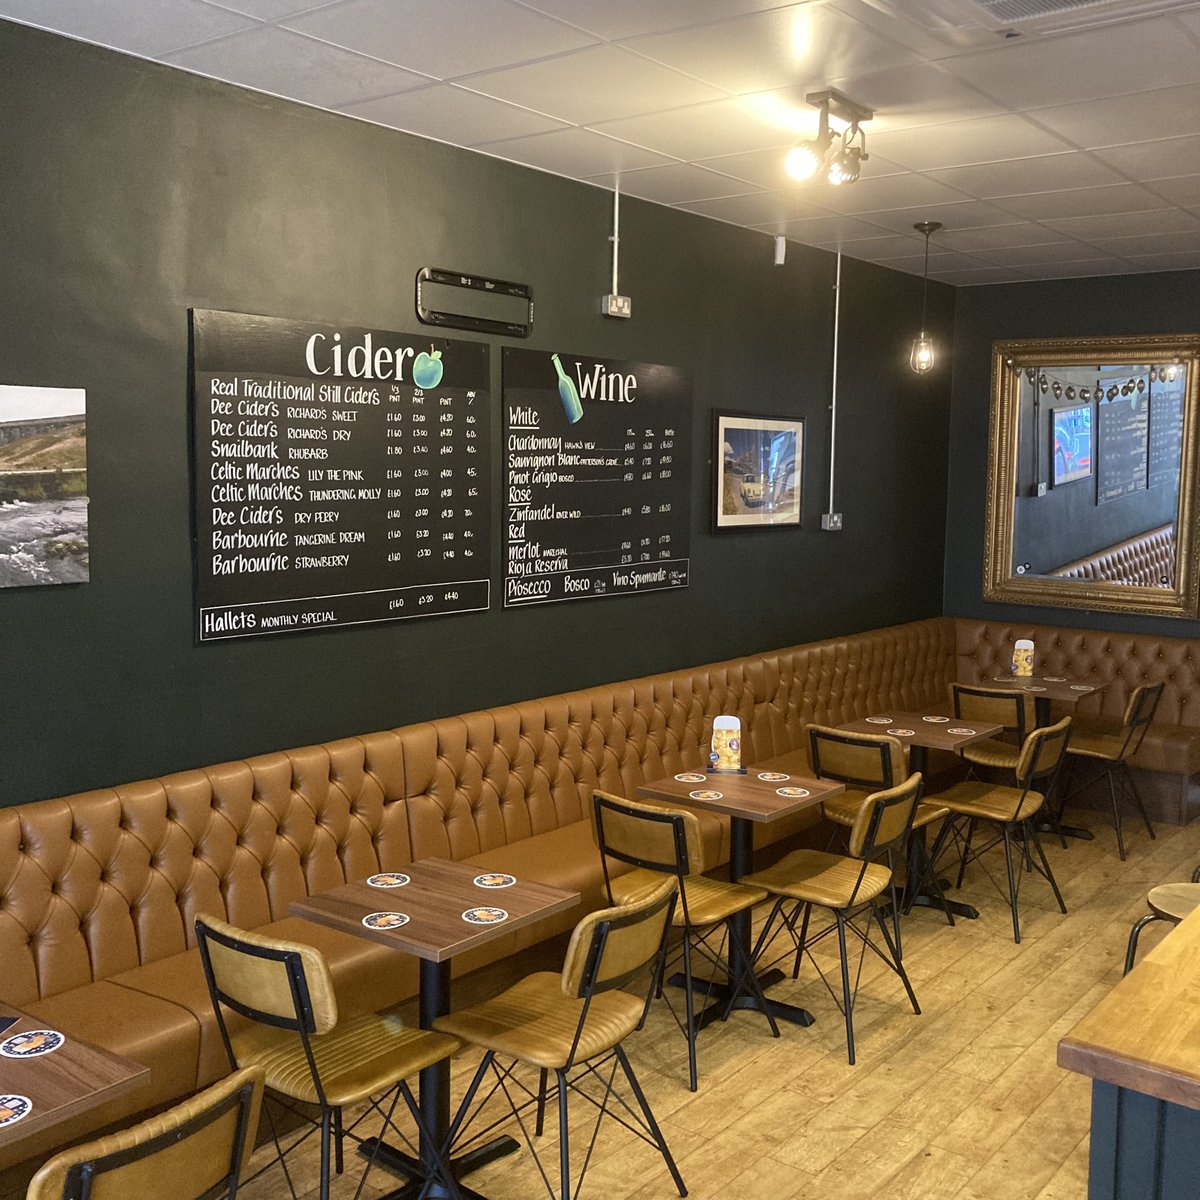 It’s Friday so if you fancy a beer and a sit down on our comfy new seating, then please pop down. It would be a pleasure to see you, oh just so you know we’ve got some @pollysbrewco @PeerlessBrewing @mobberleybeer @redwillowbrew @SaltaireBrewery Cheers